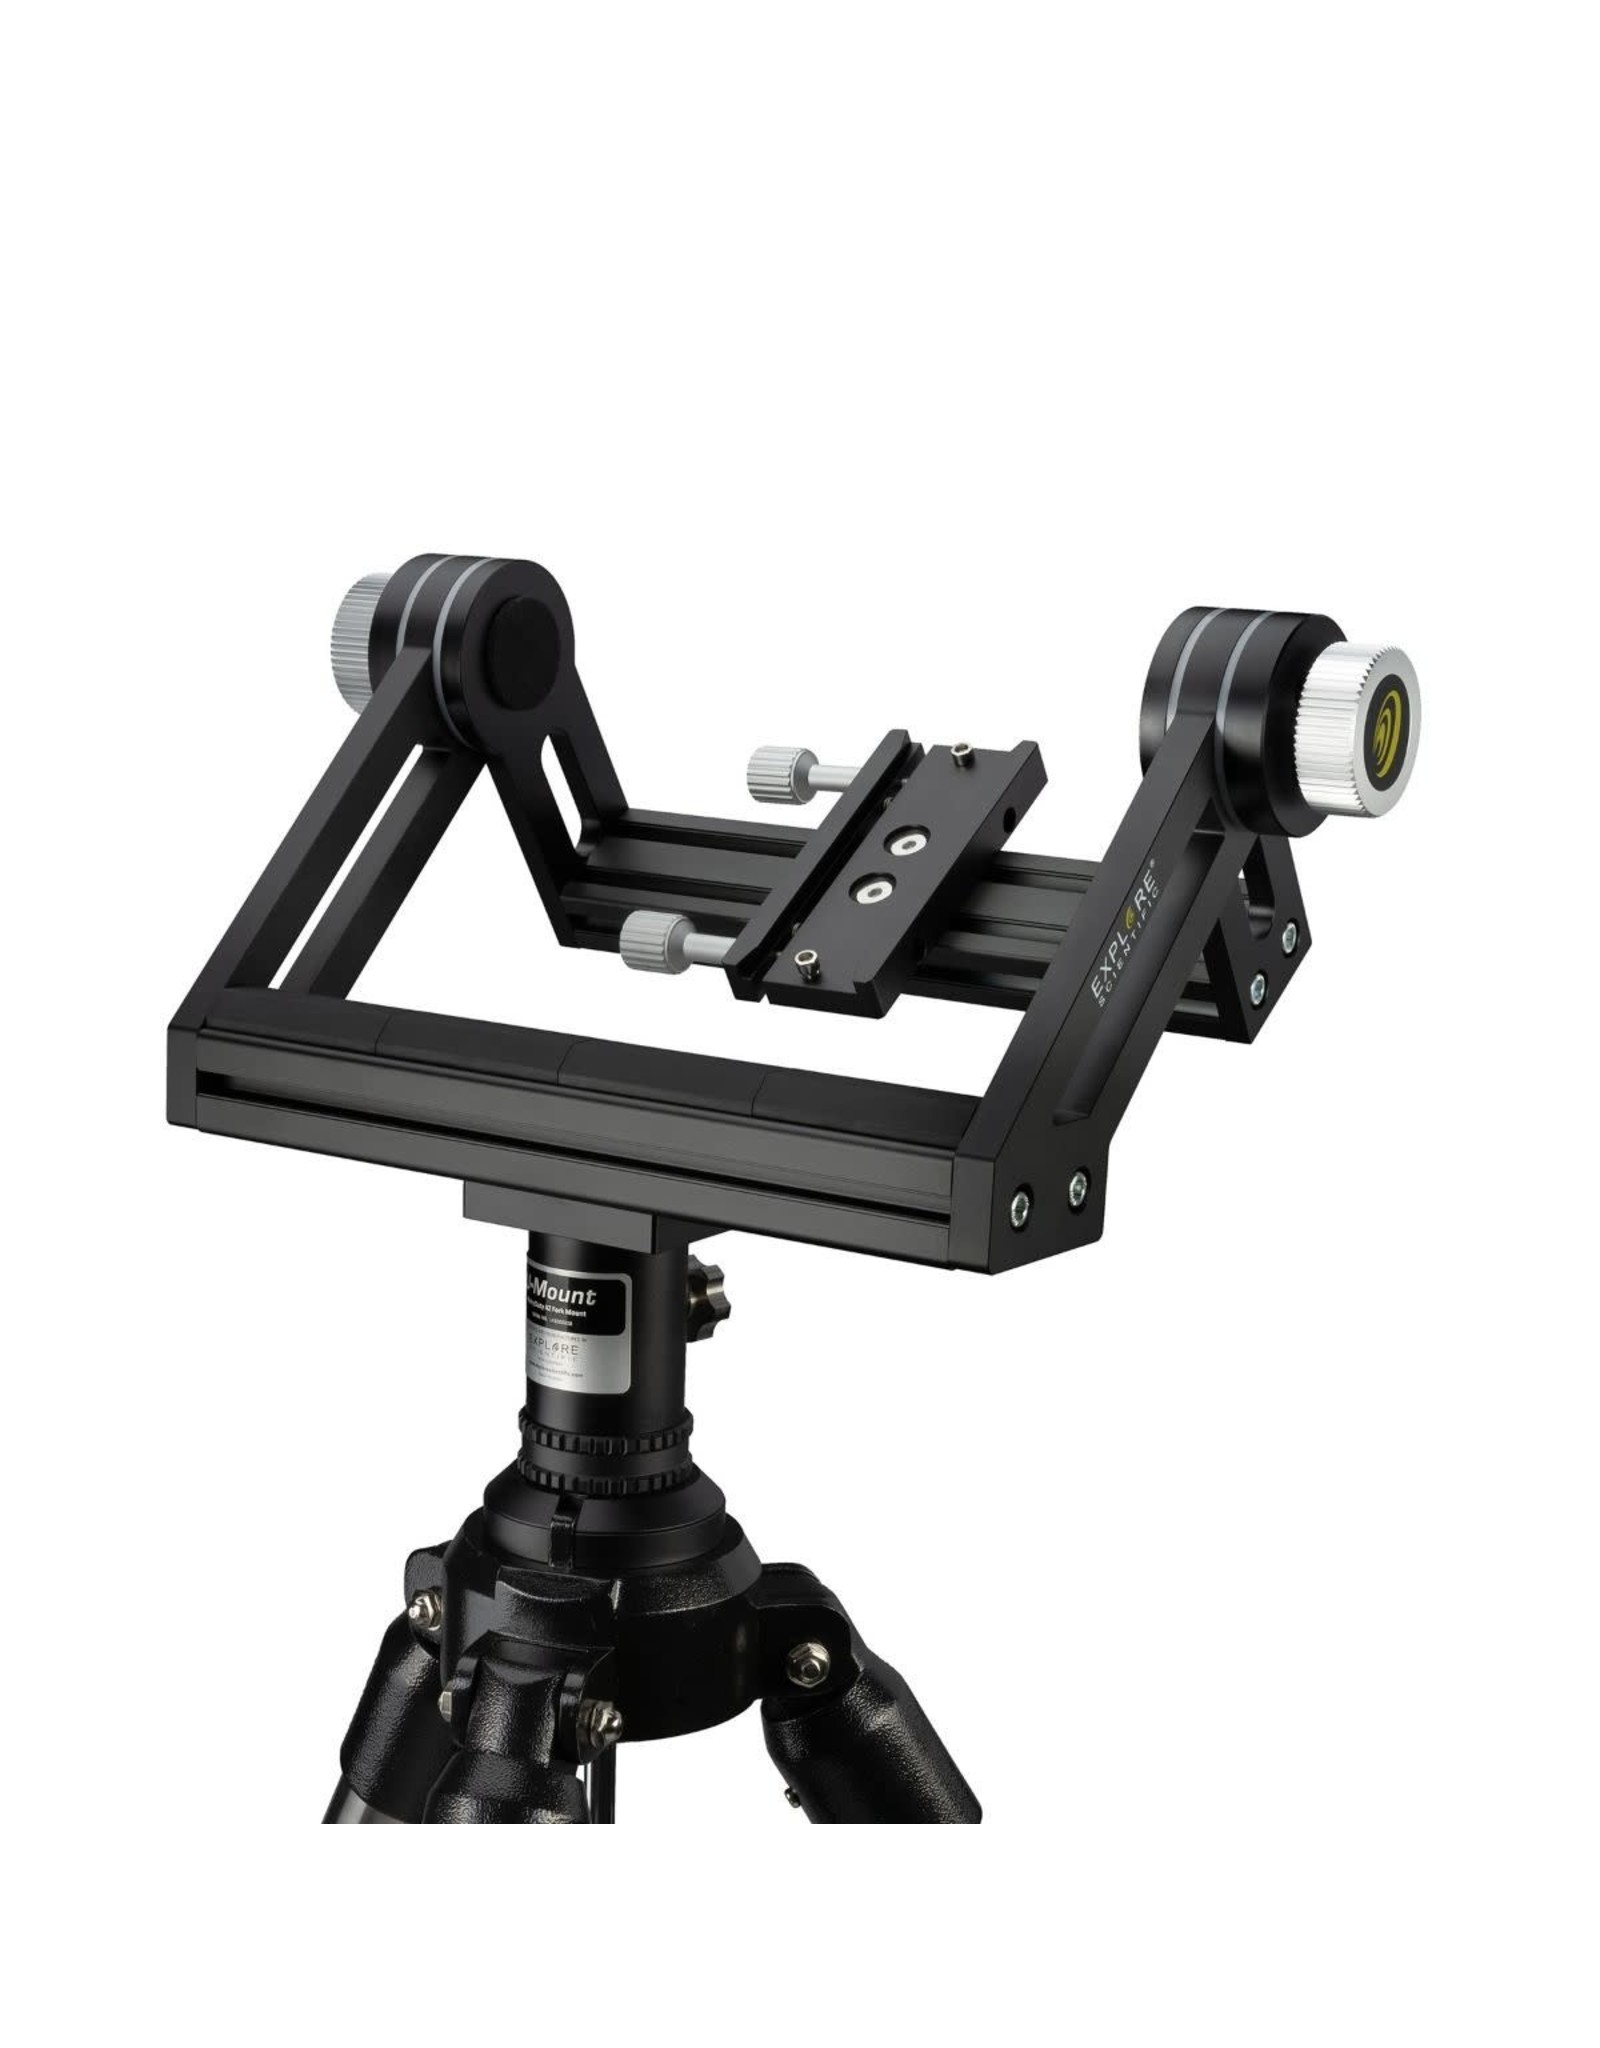 Is a Telescope Tripod the Same as for a Camera?